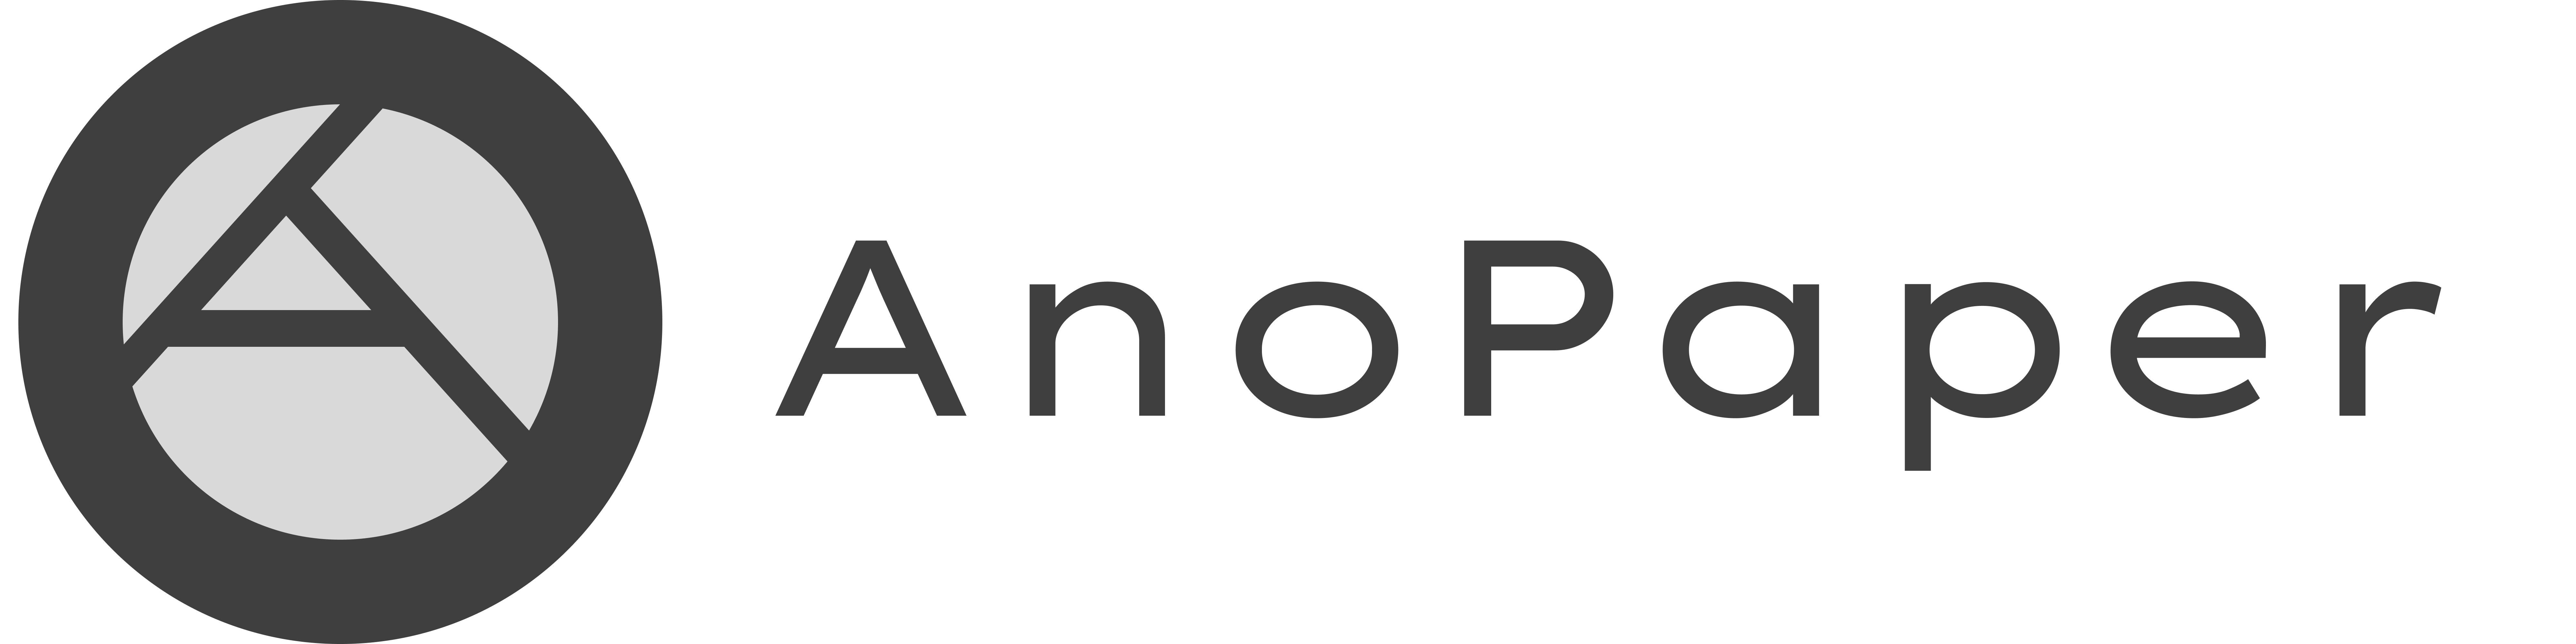 Anopaper logo with text